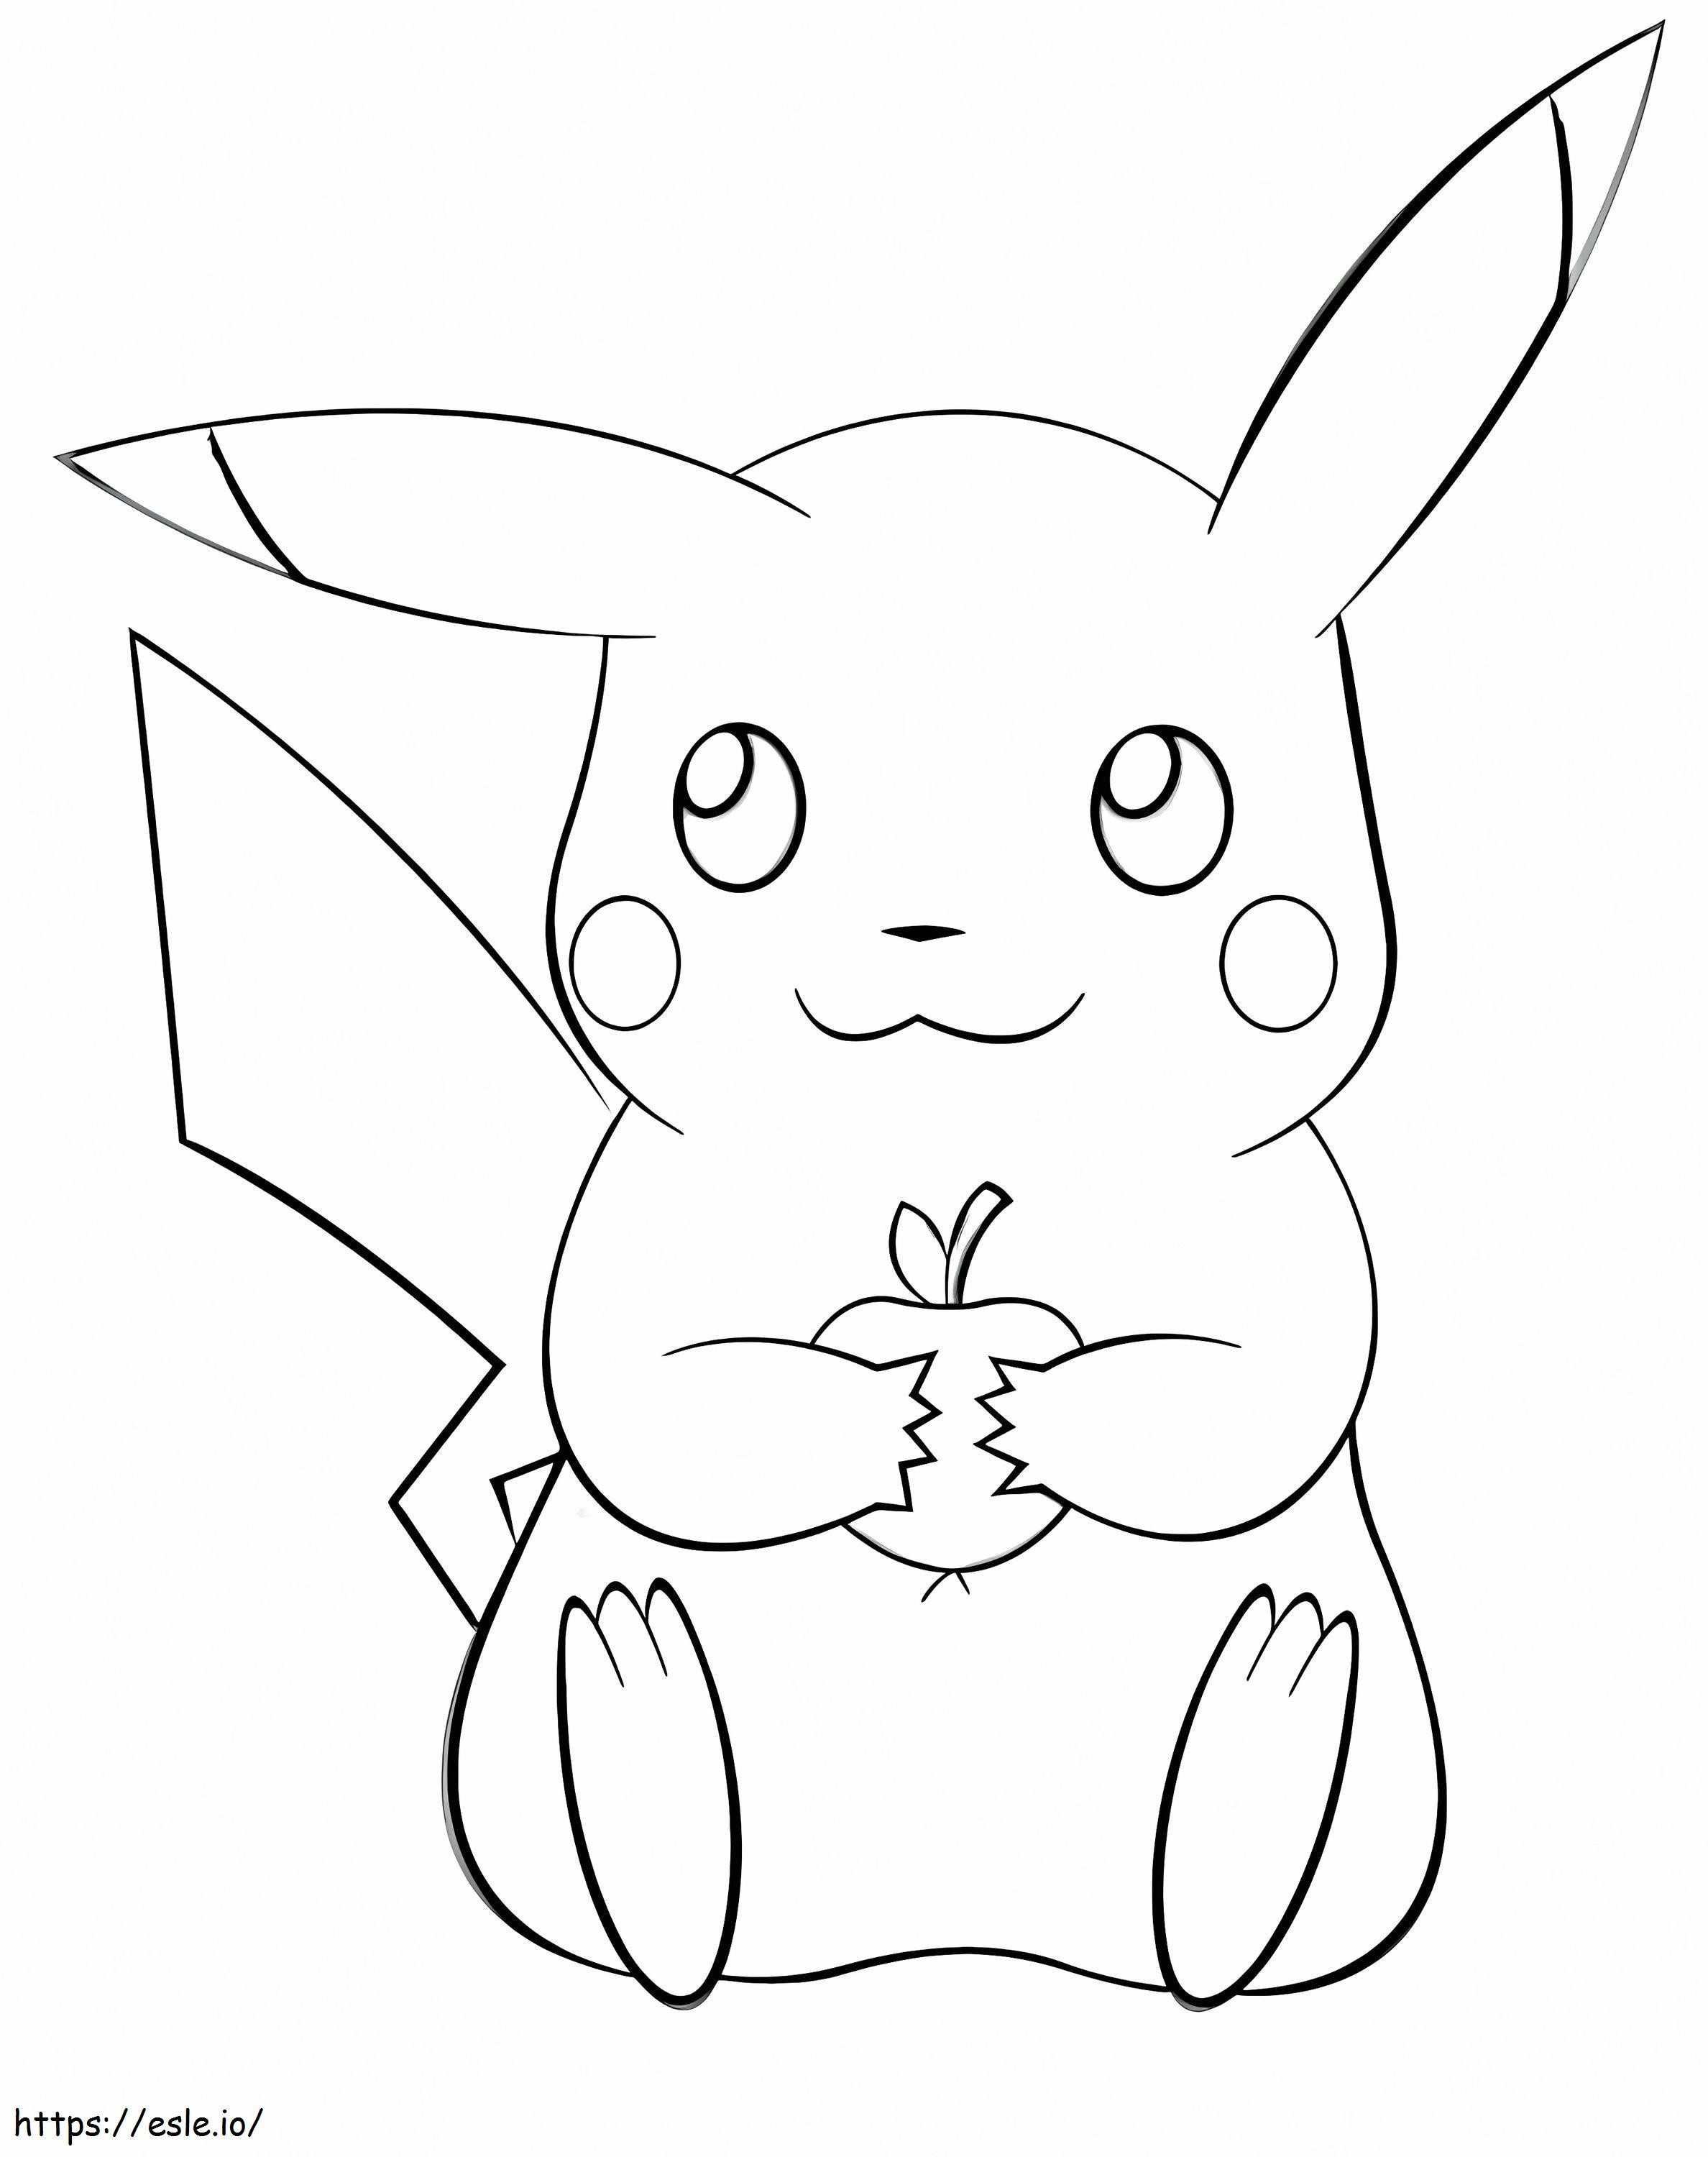 Pikachu With An Apple coloring page